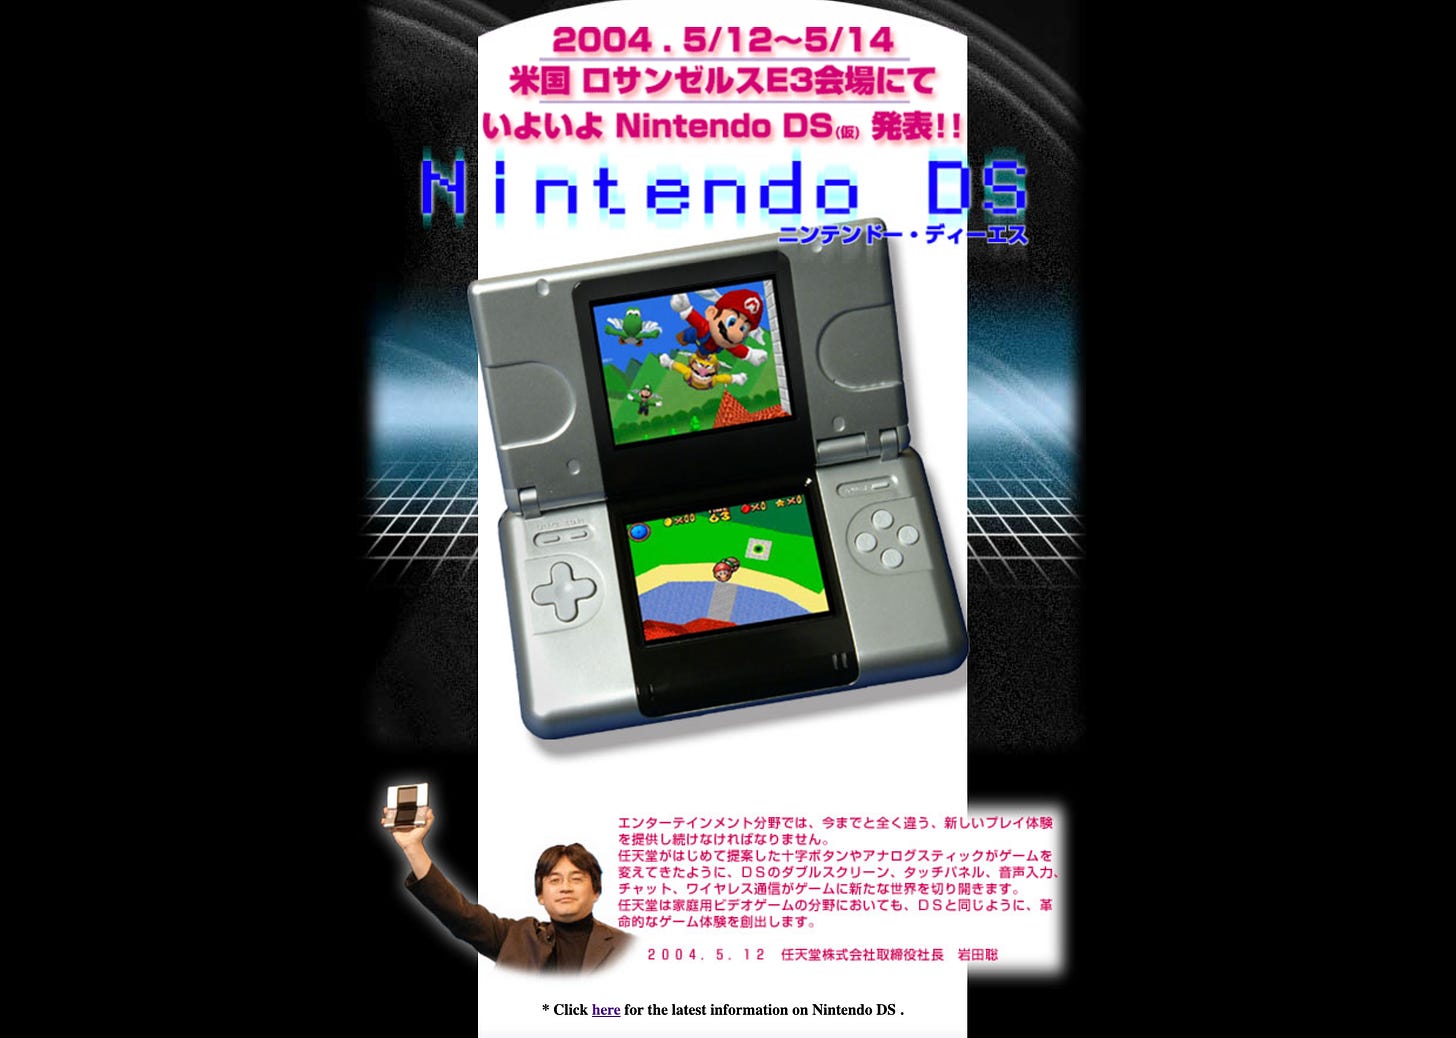 Screenshot of a website showing a Nintendo DS and Satoru Iwata holding the system. The website is mostly in Japanese and promotes the unveiling of the system.